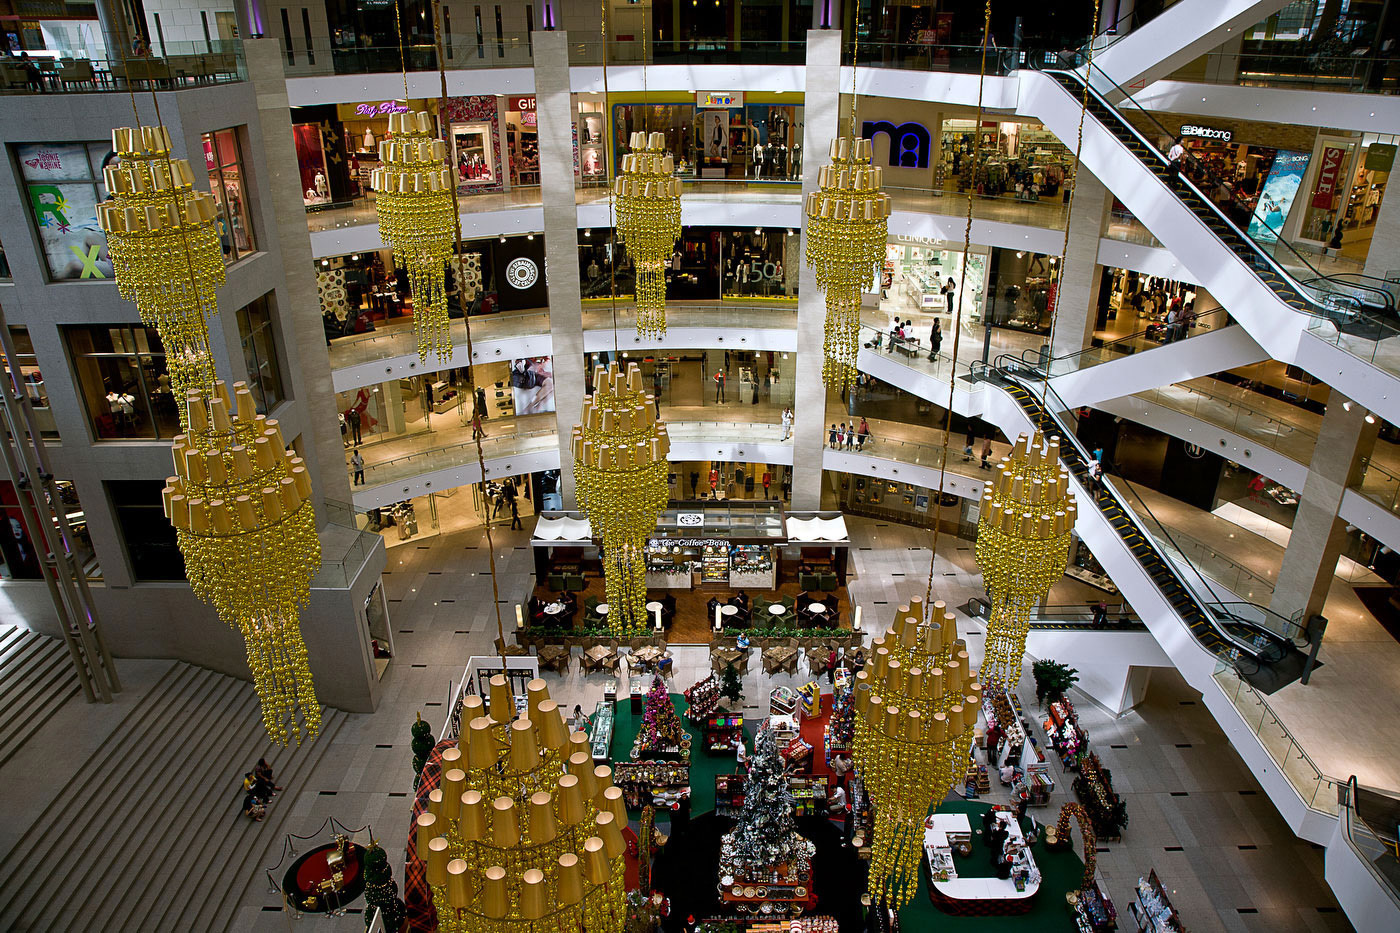 The Pavilion mall in KL :  DAILY LIFE; The Rich, the Poor & the Others : Viviane Moos |  Documentary Photographer